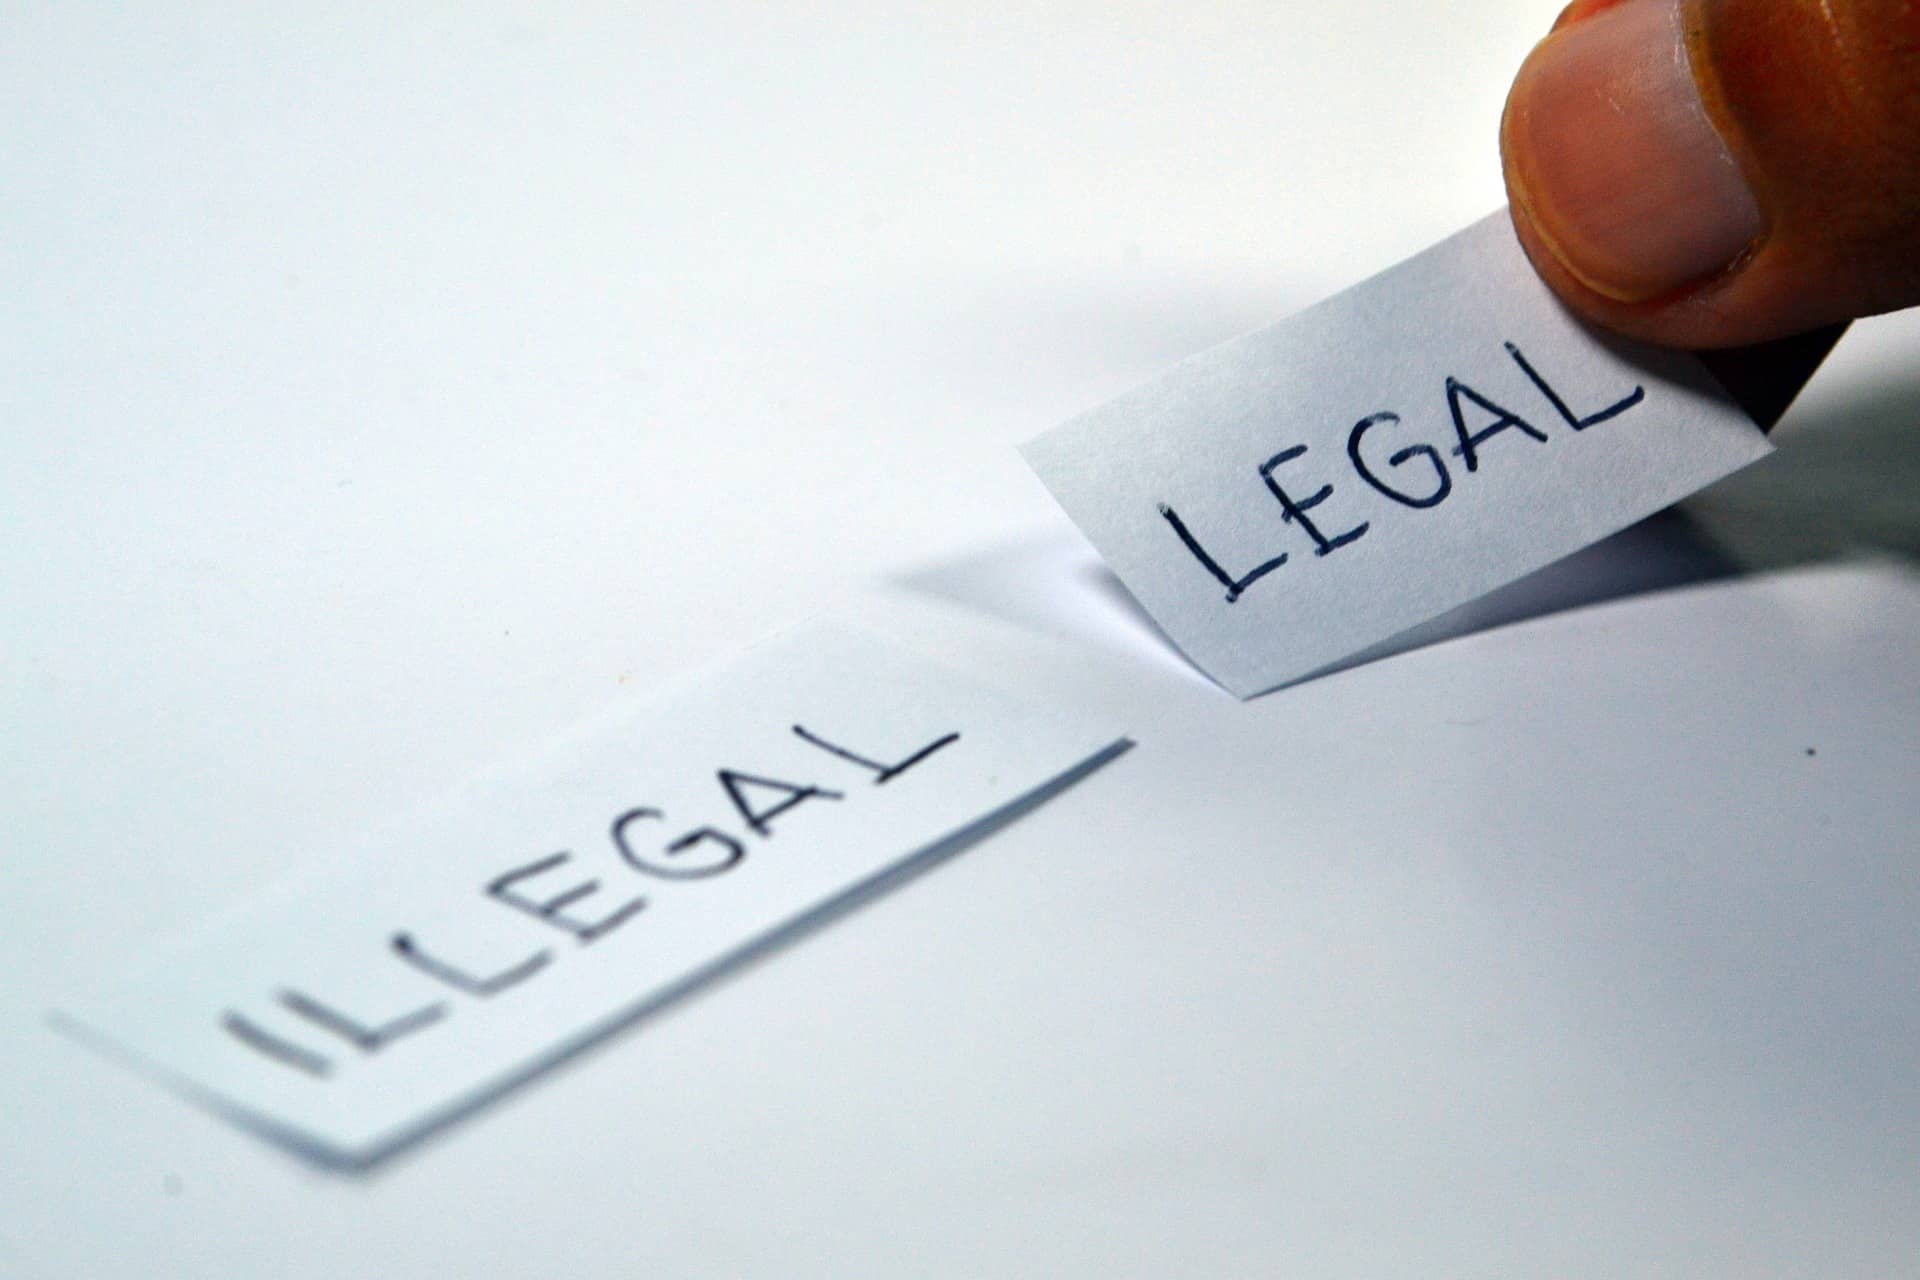 Legal and Illegal Labels